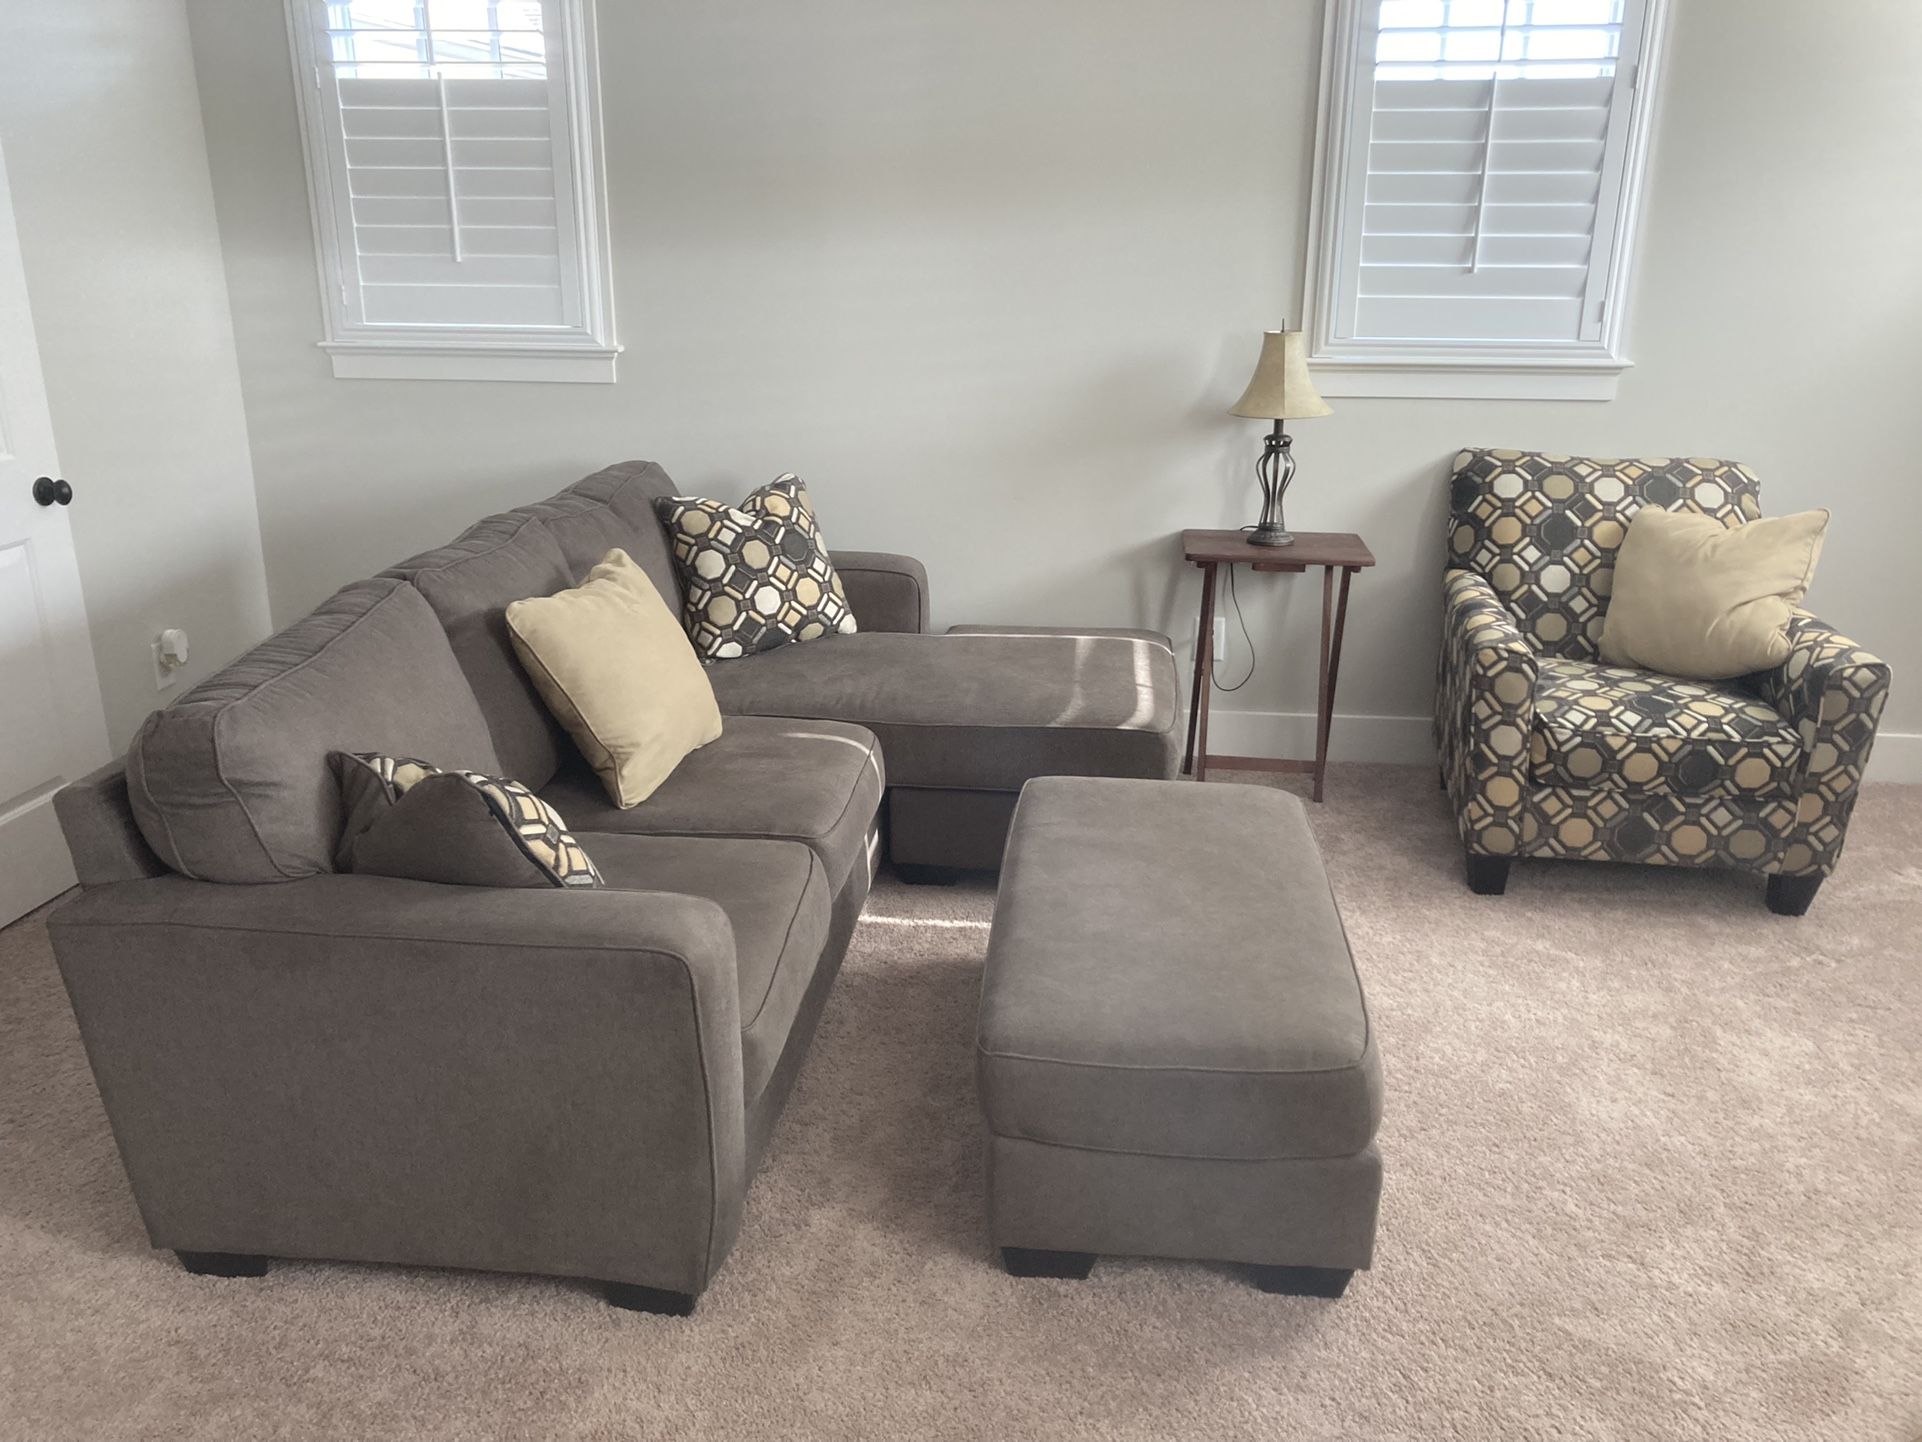 3 piece living room set from Ashley Furniture, including sectional with right or left chaise, plus ottoman, and chair